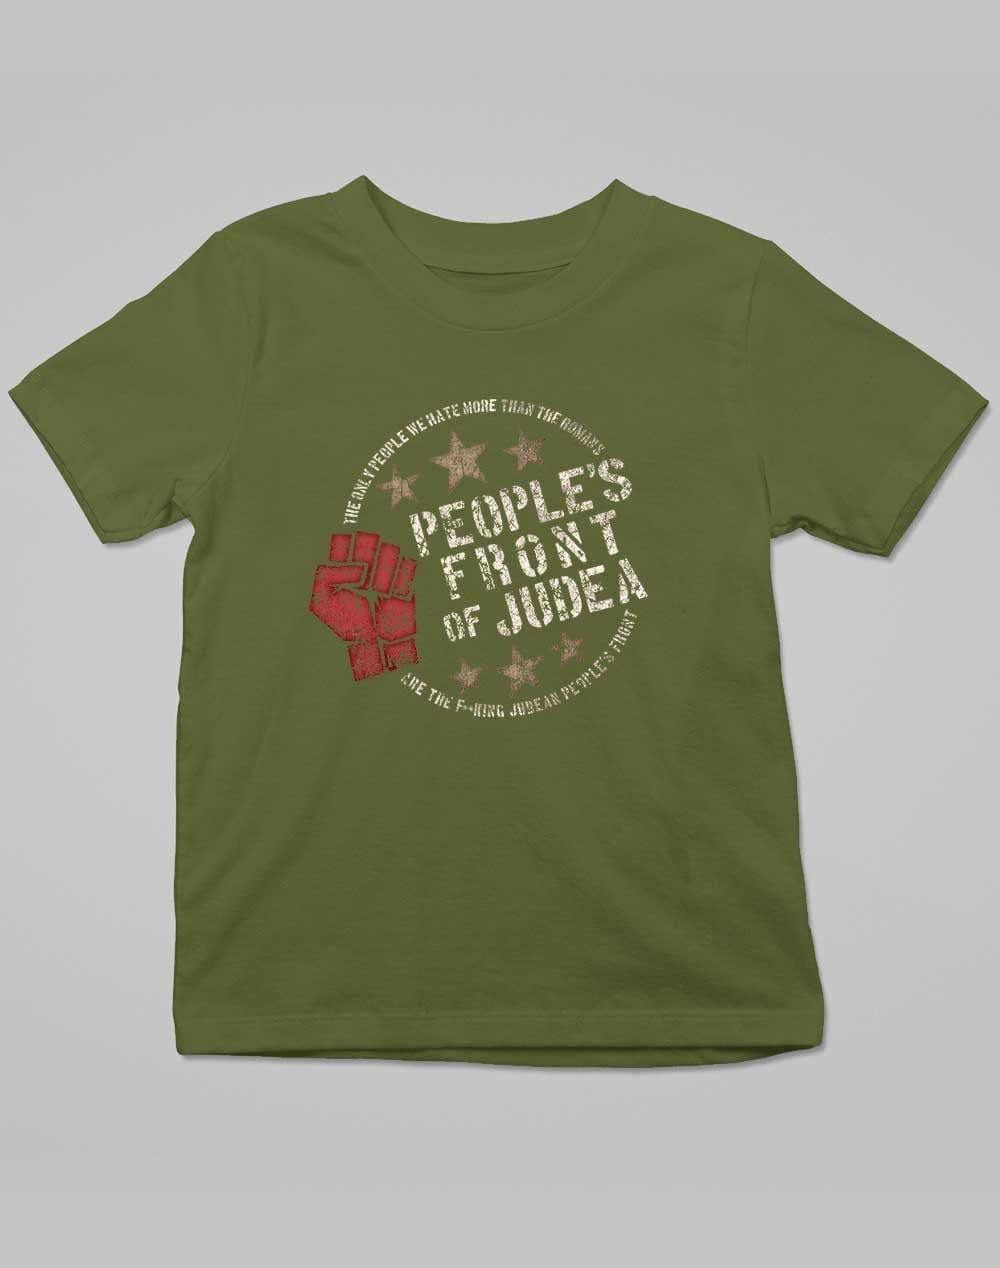 People's Front of Judea Kids T-Shirt 3-4 years / Army  - Off World Tees